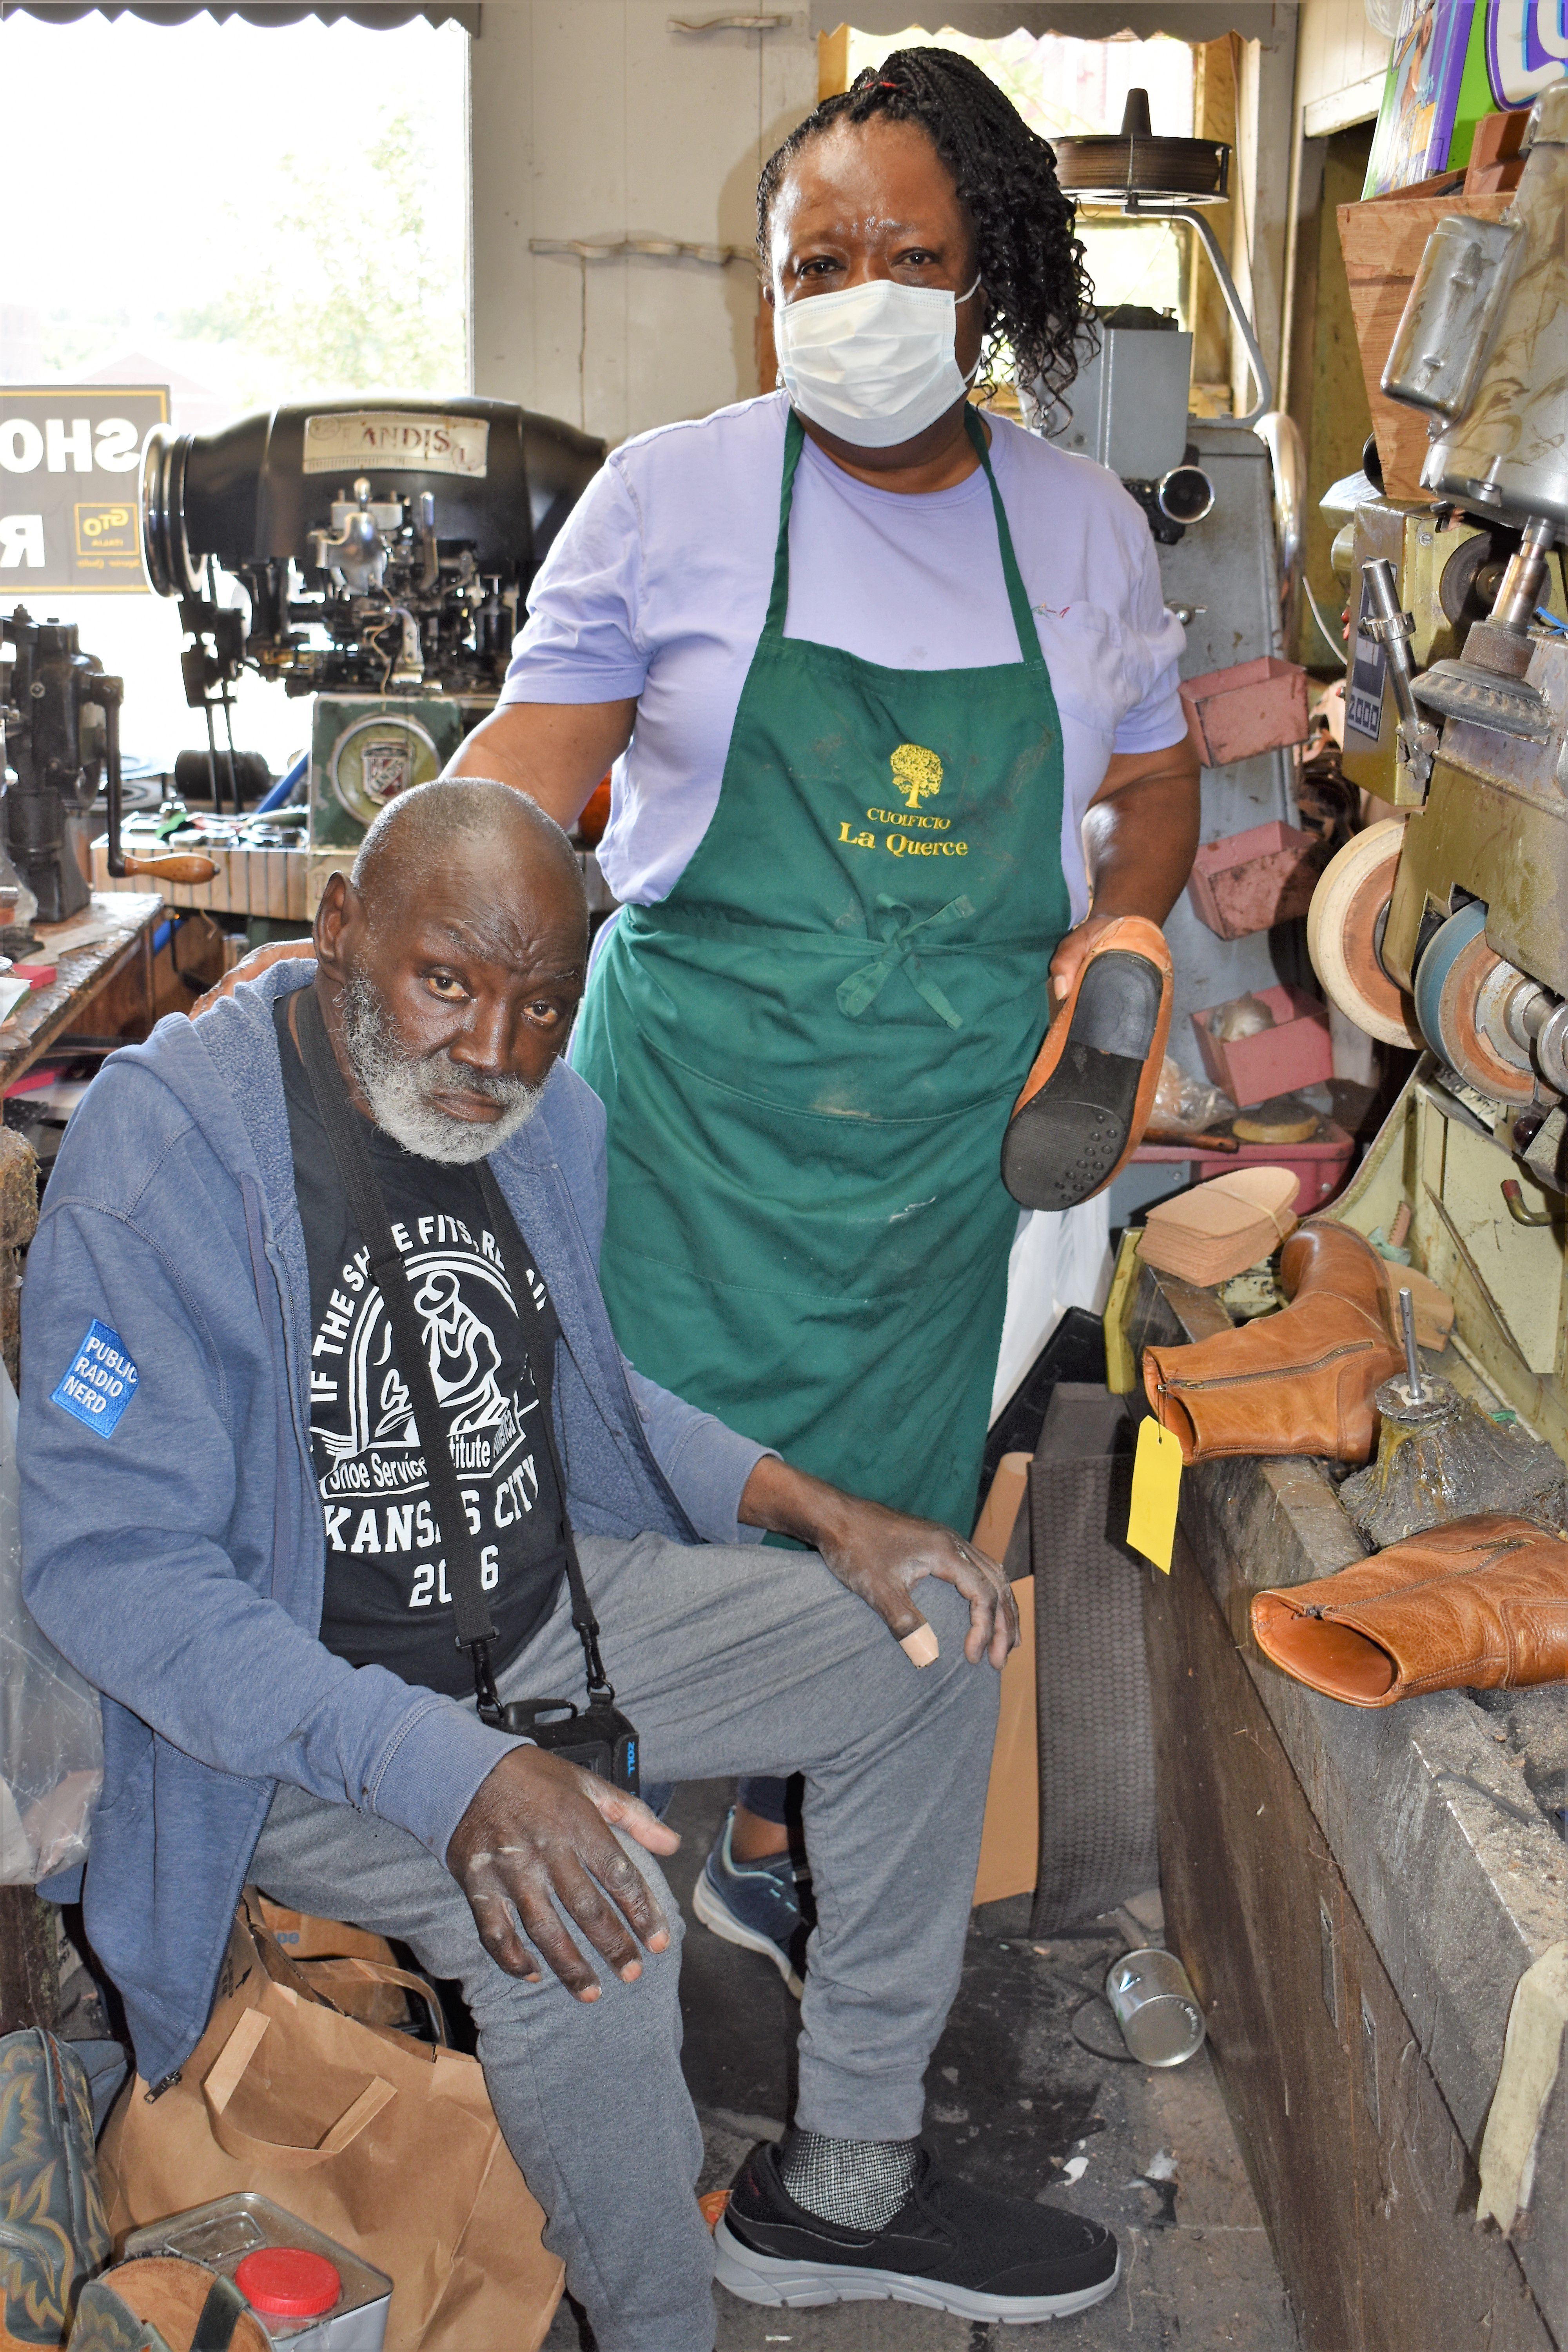 Ace Shoe Repair's owner, Mr. Willie, gets support from nearby